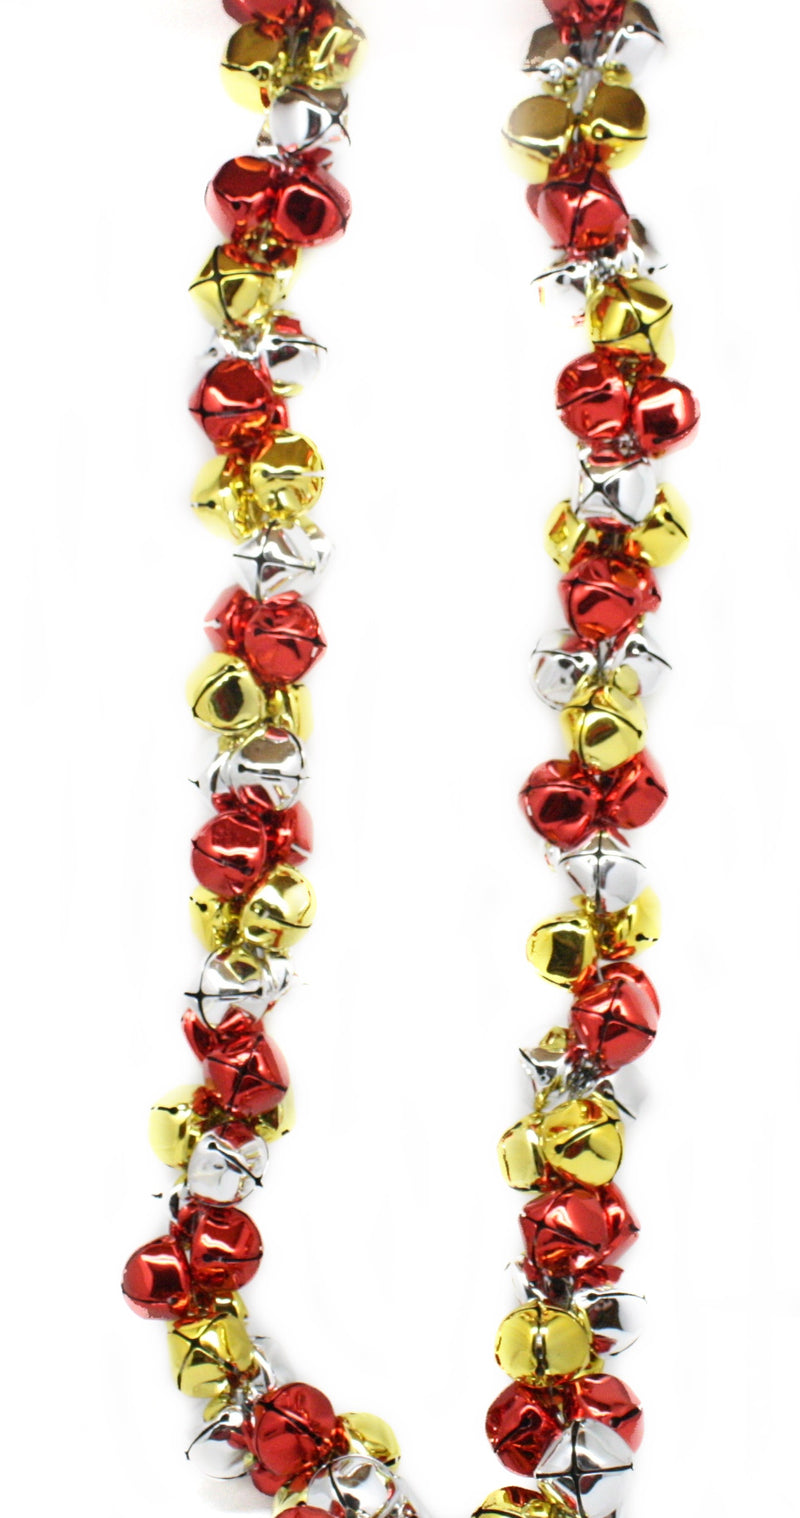 70 Inch Metal Jingle Bell Garland - Red/Gold/Silver